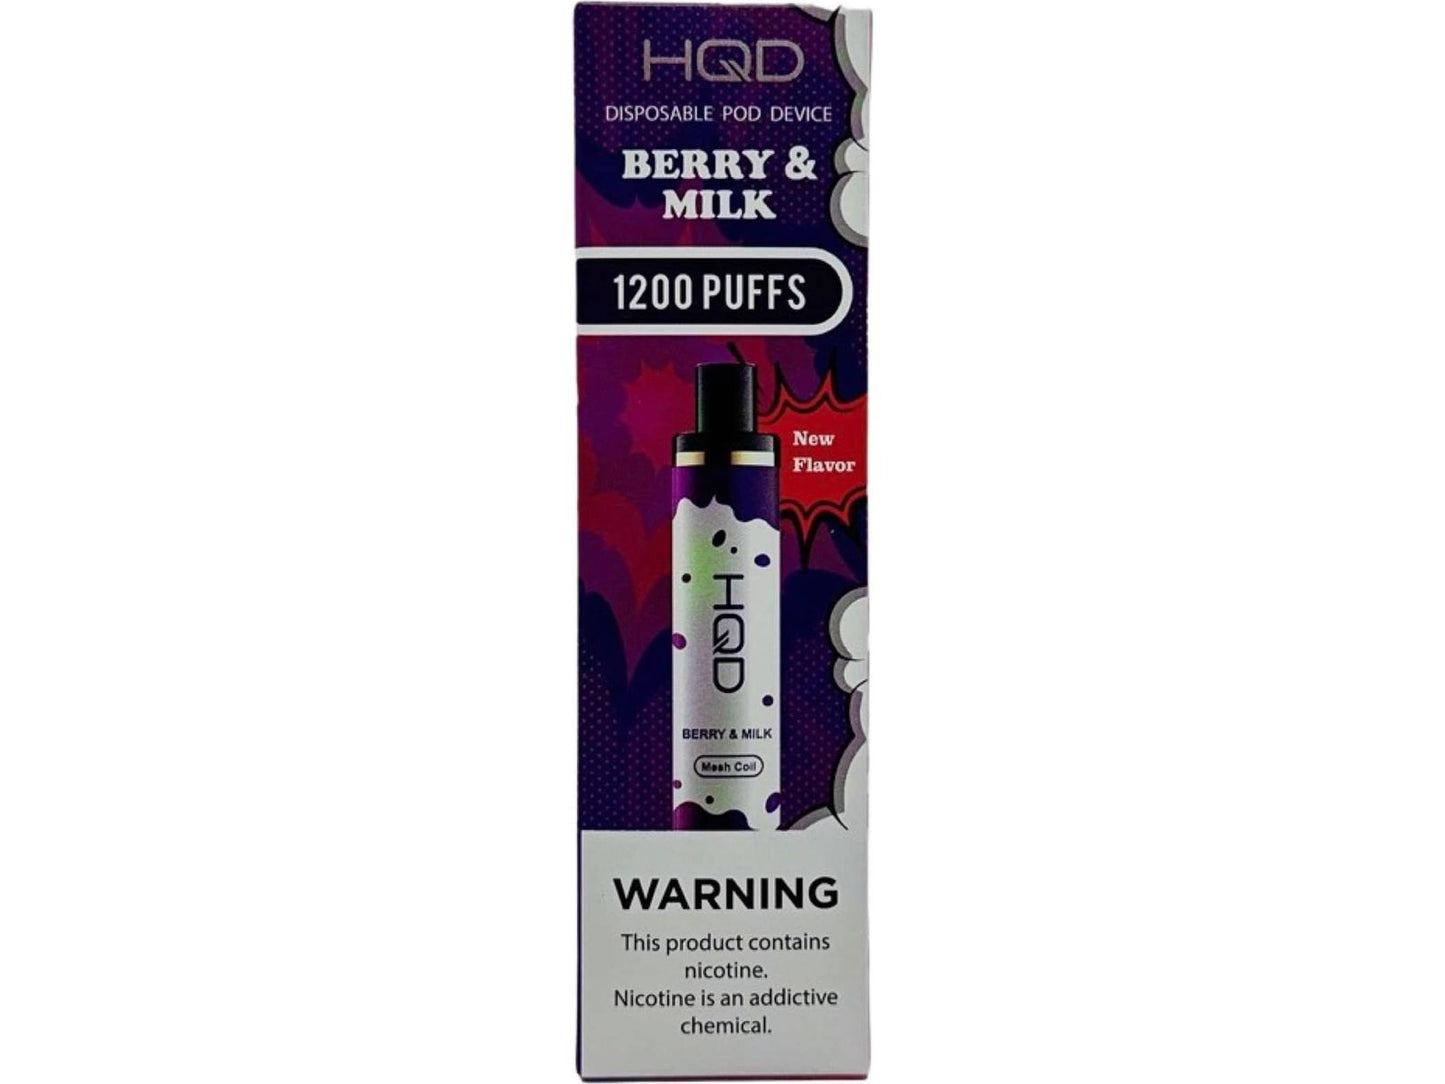 Hqd Plus Disposable Vape - Berry And Milk